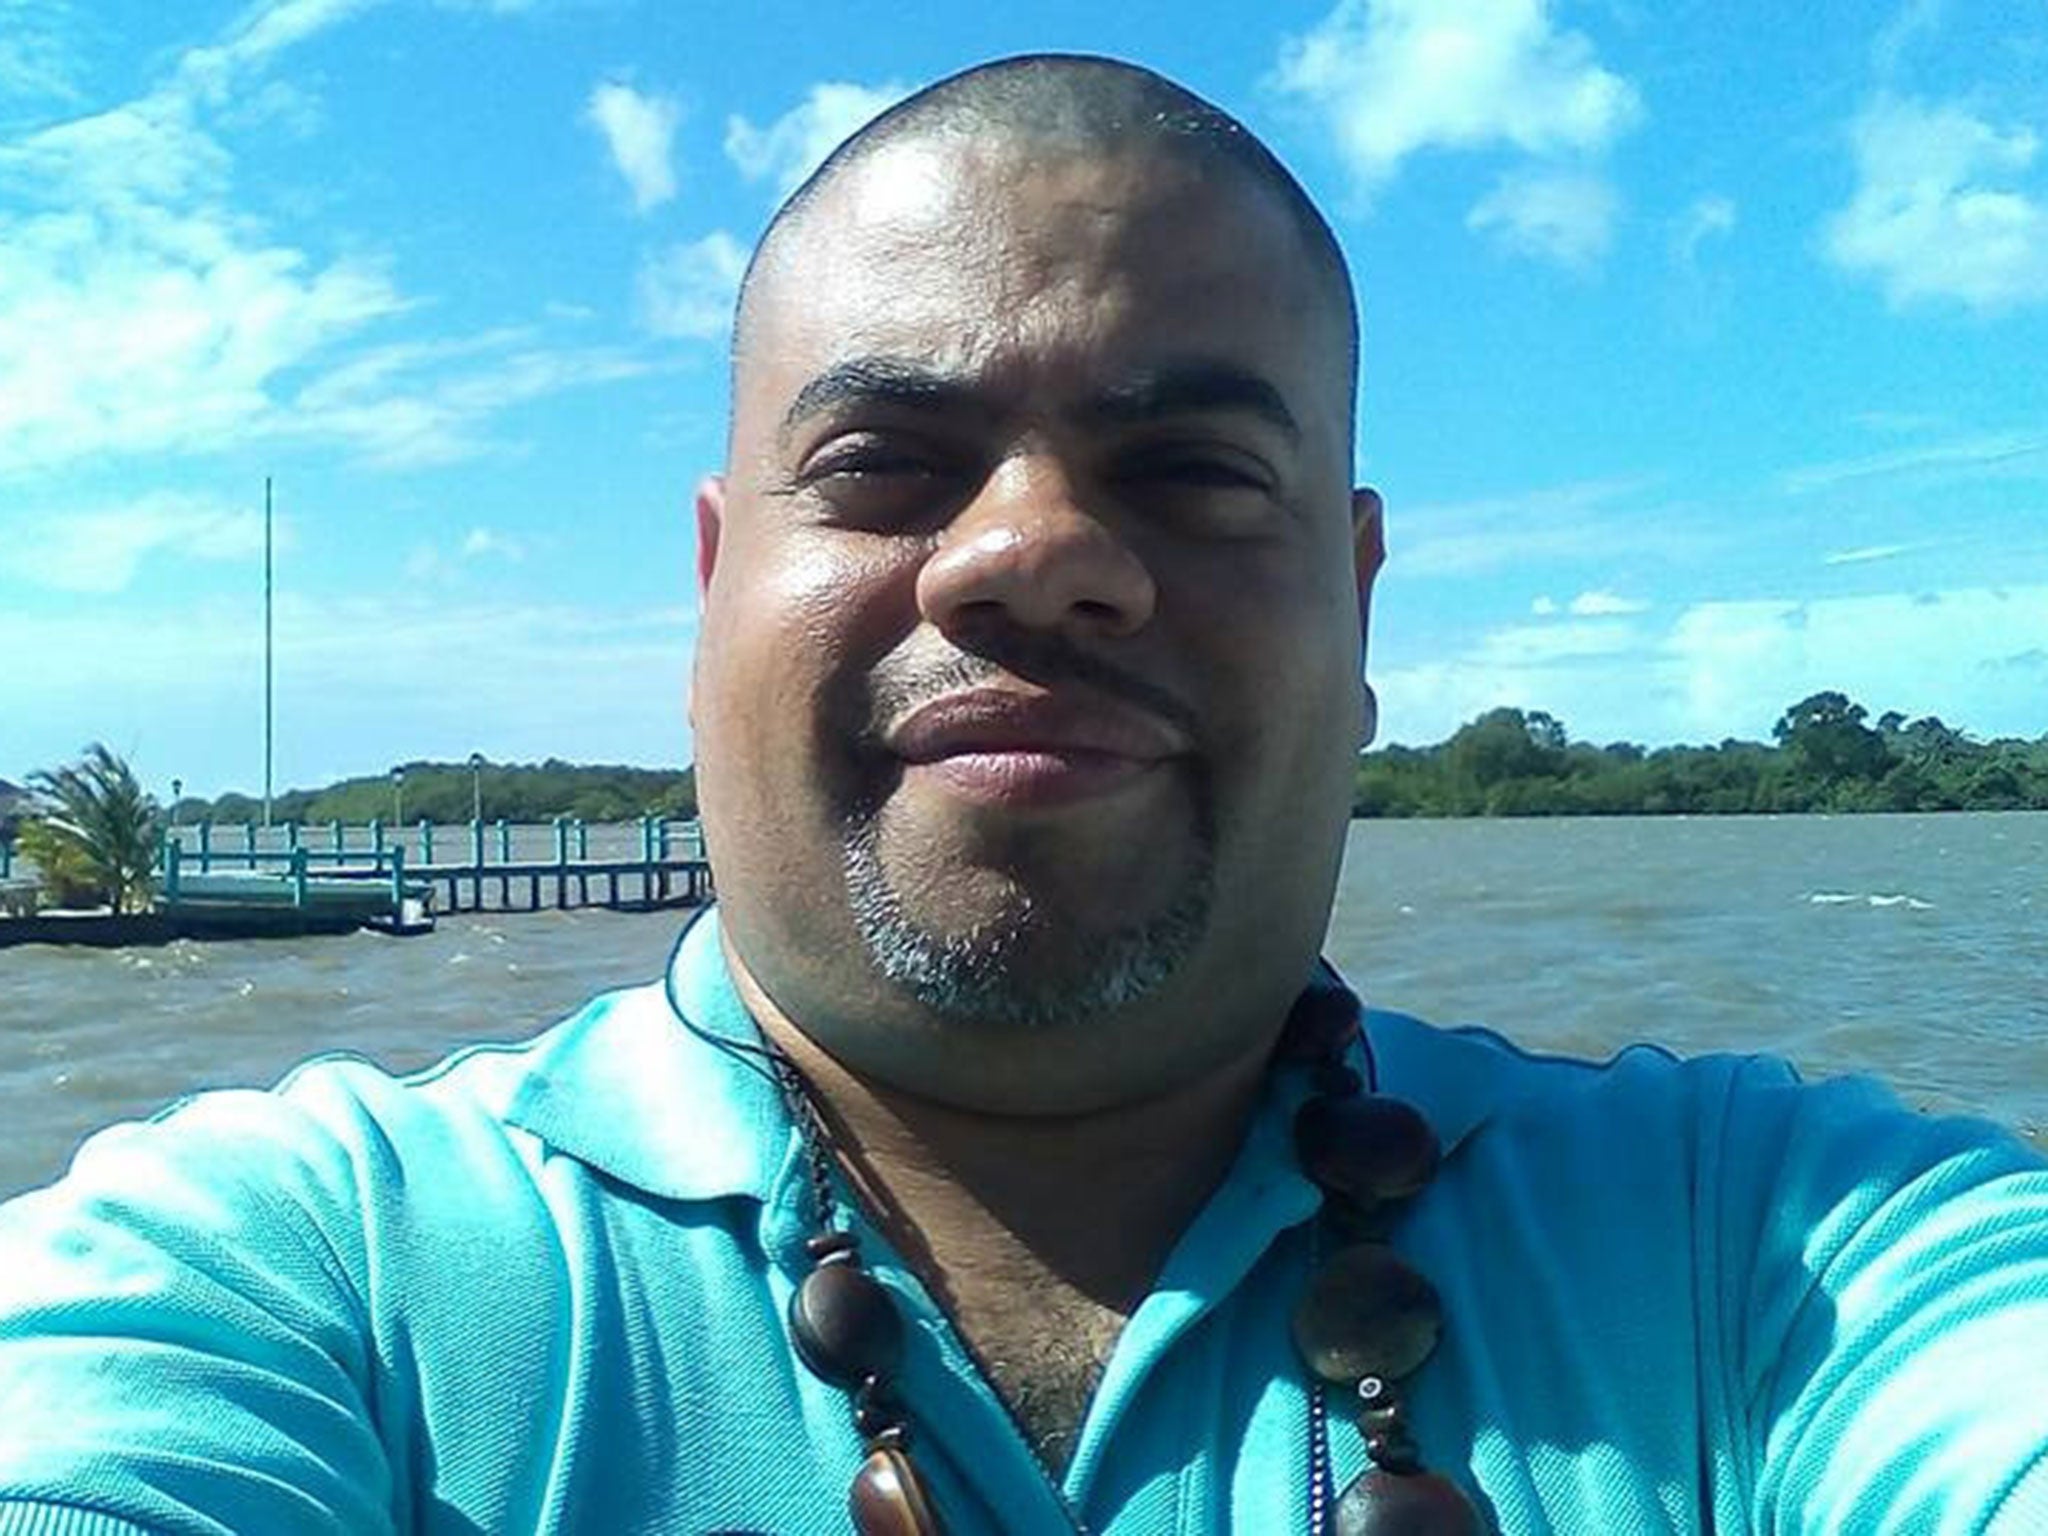 Angel Gahona, who worked for the news show Meridiano, was reporting in the town of Bluefields in the country's southern Caribbean coast